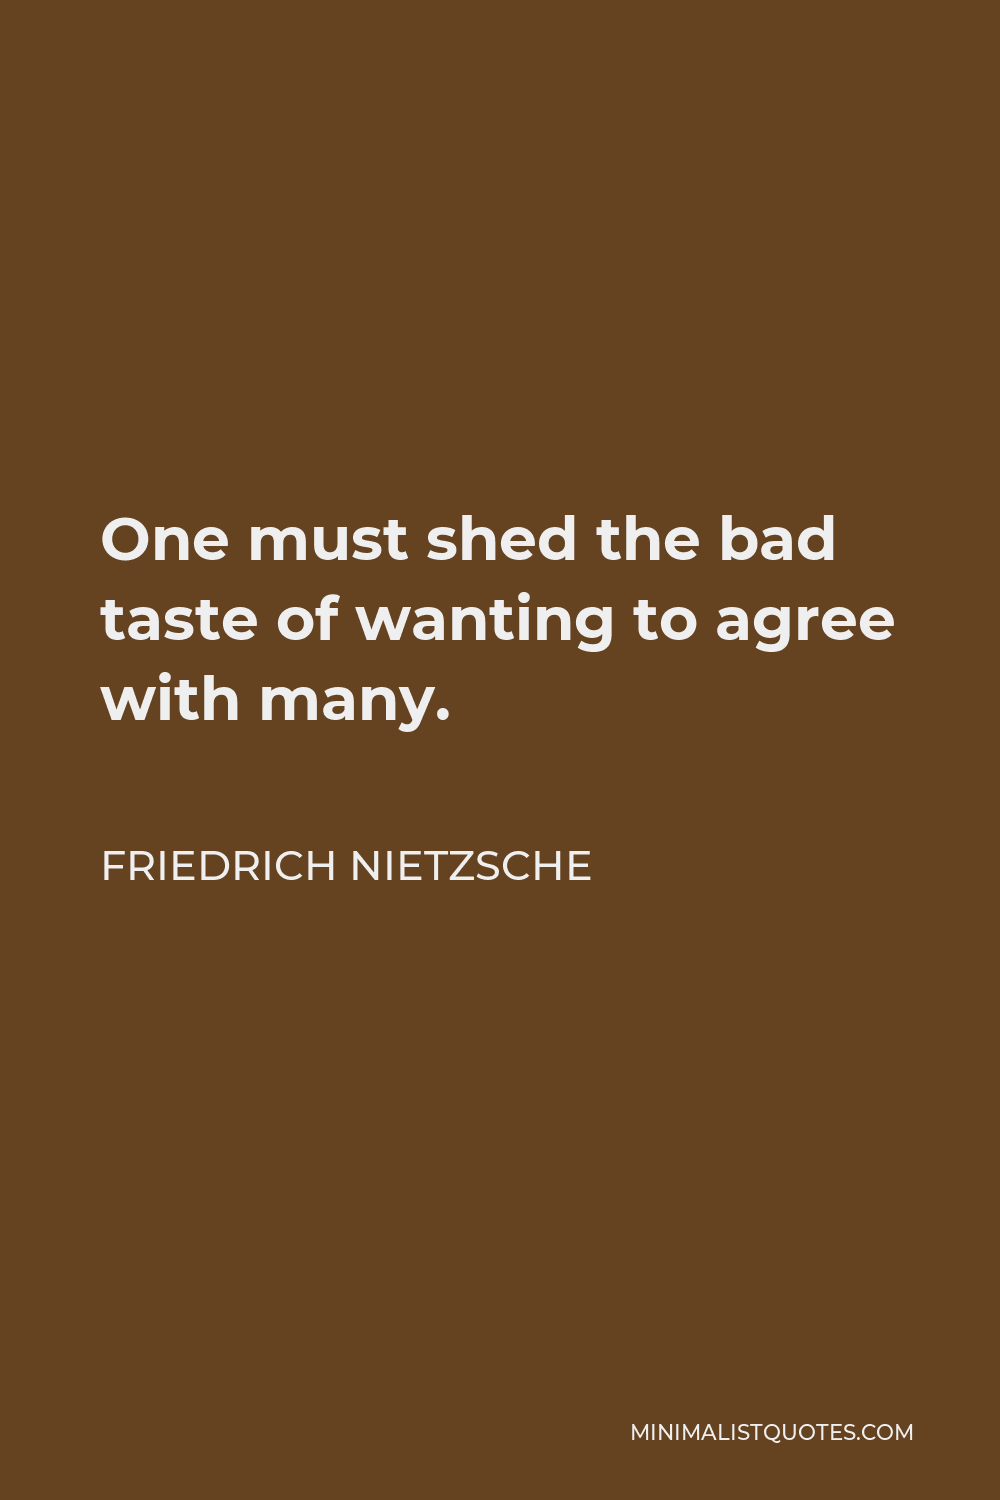 Friedrich Nietzsche Quote - One must shed the bad taste of wanting to agree with many.